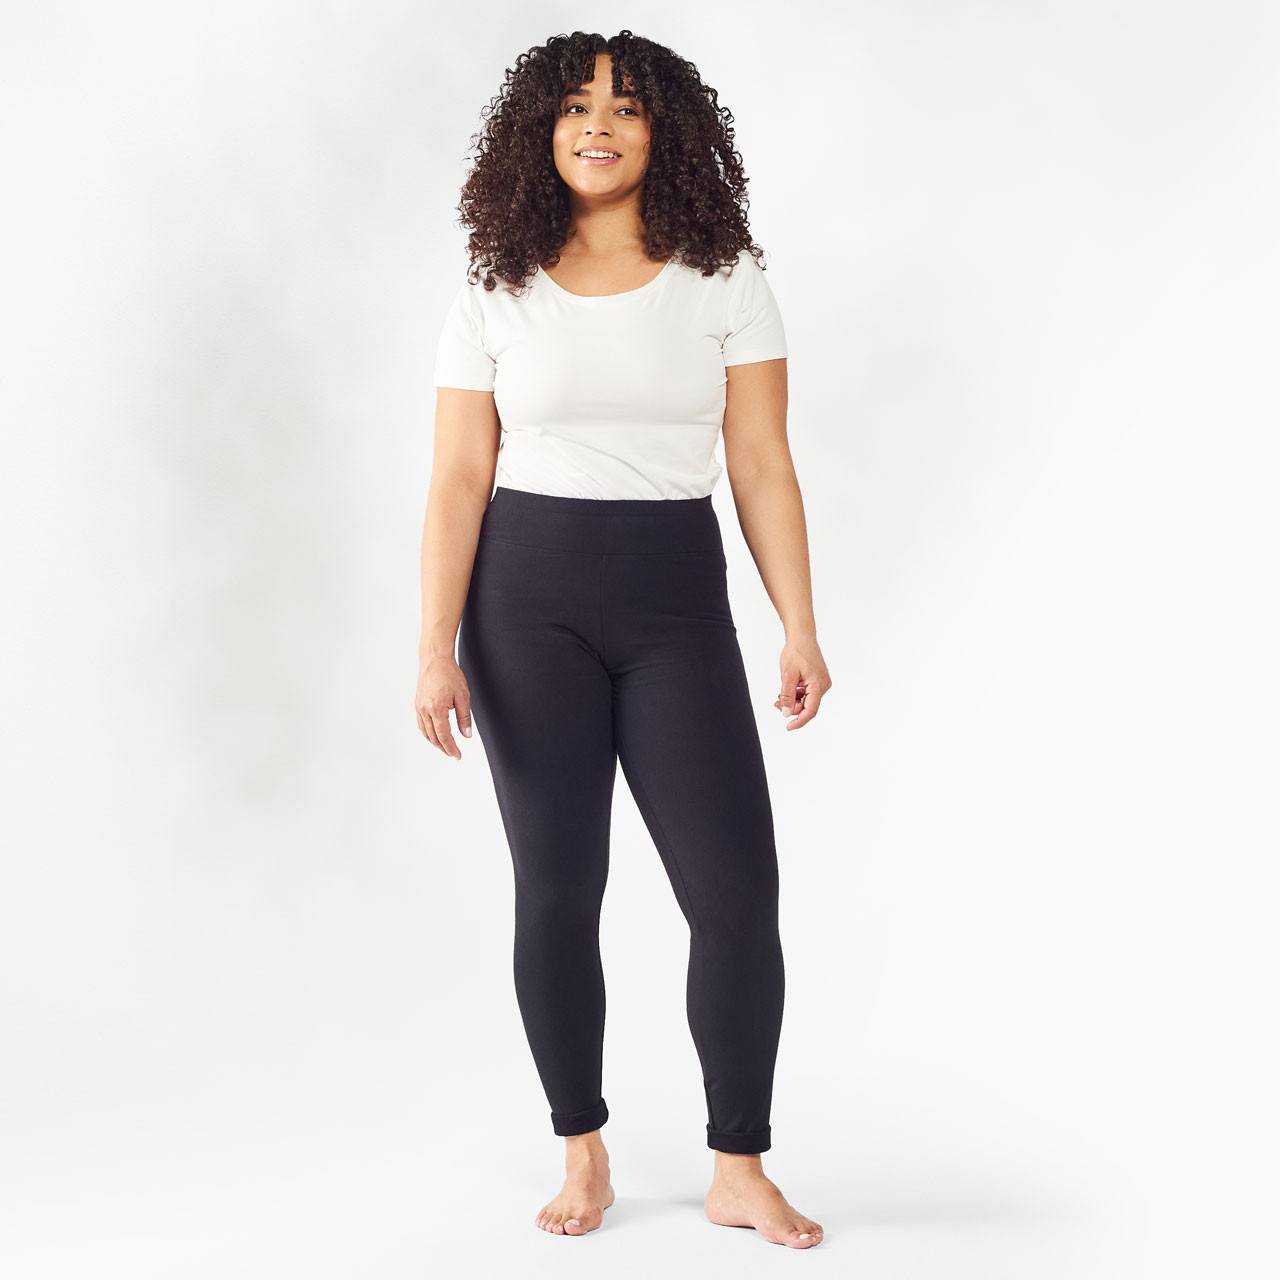 Why your gyno loves your leggings